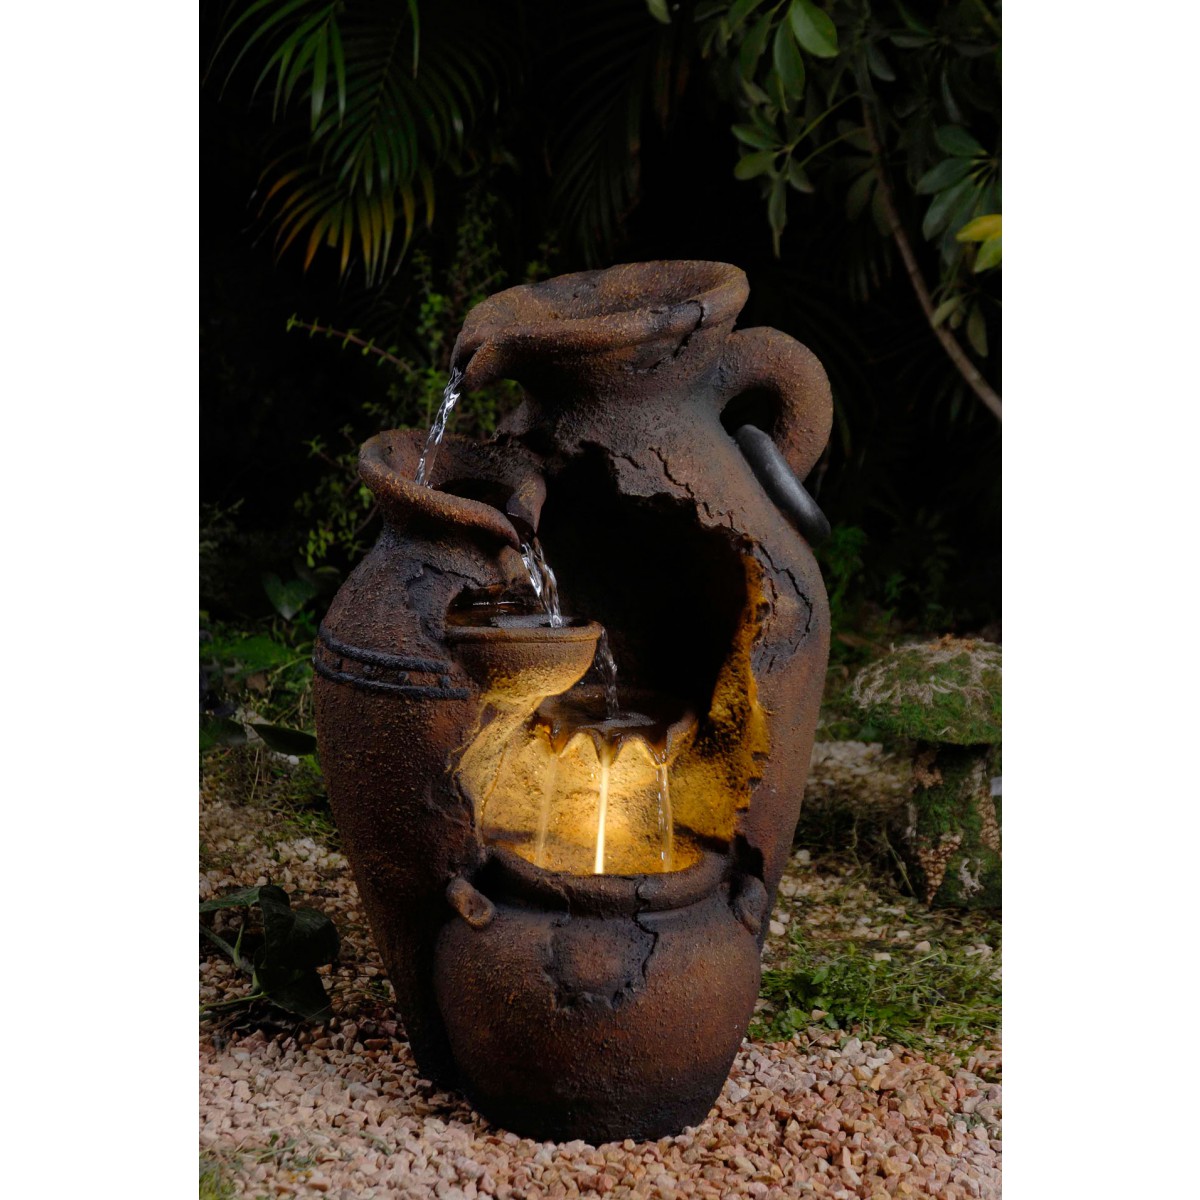 Jeco Old Fashion Pot Outdoor Fountain With Led Light